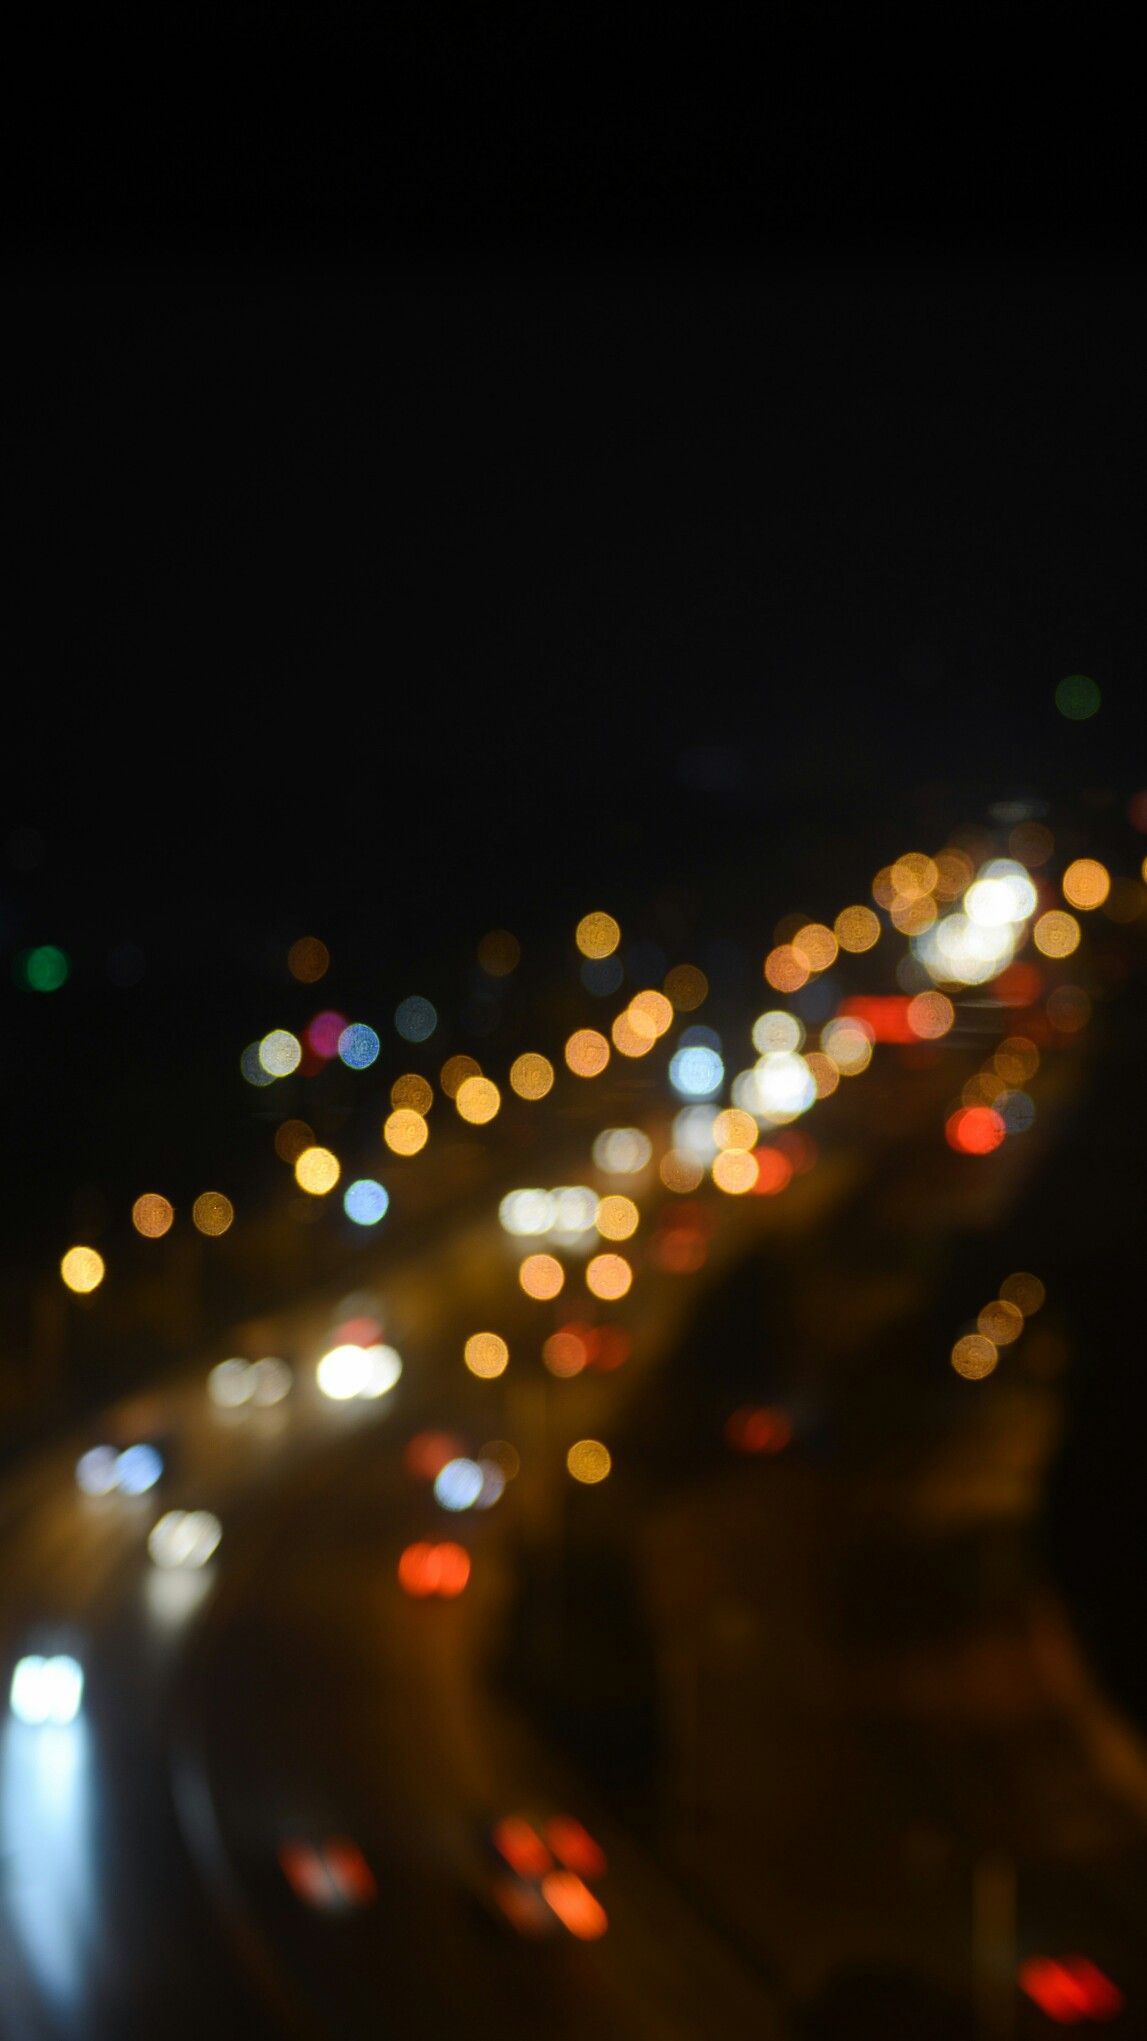 Blurr light android. Blurred lights, Night aesthetic, Bokeh photography